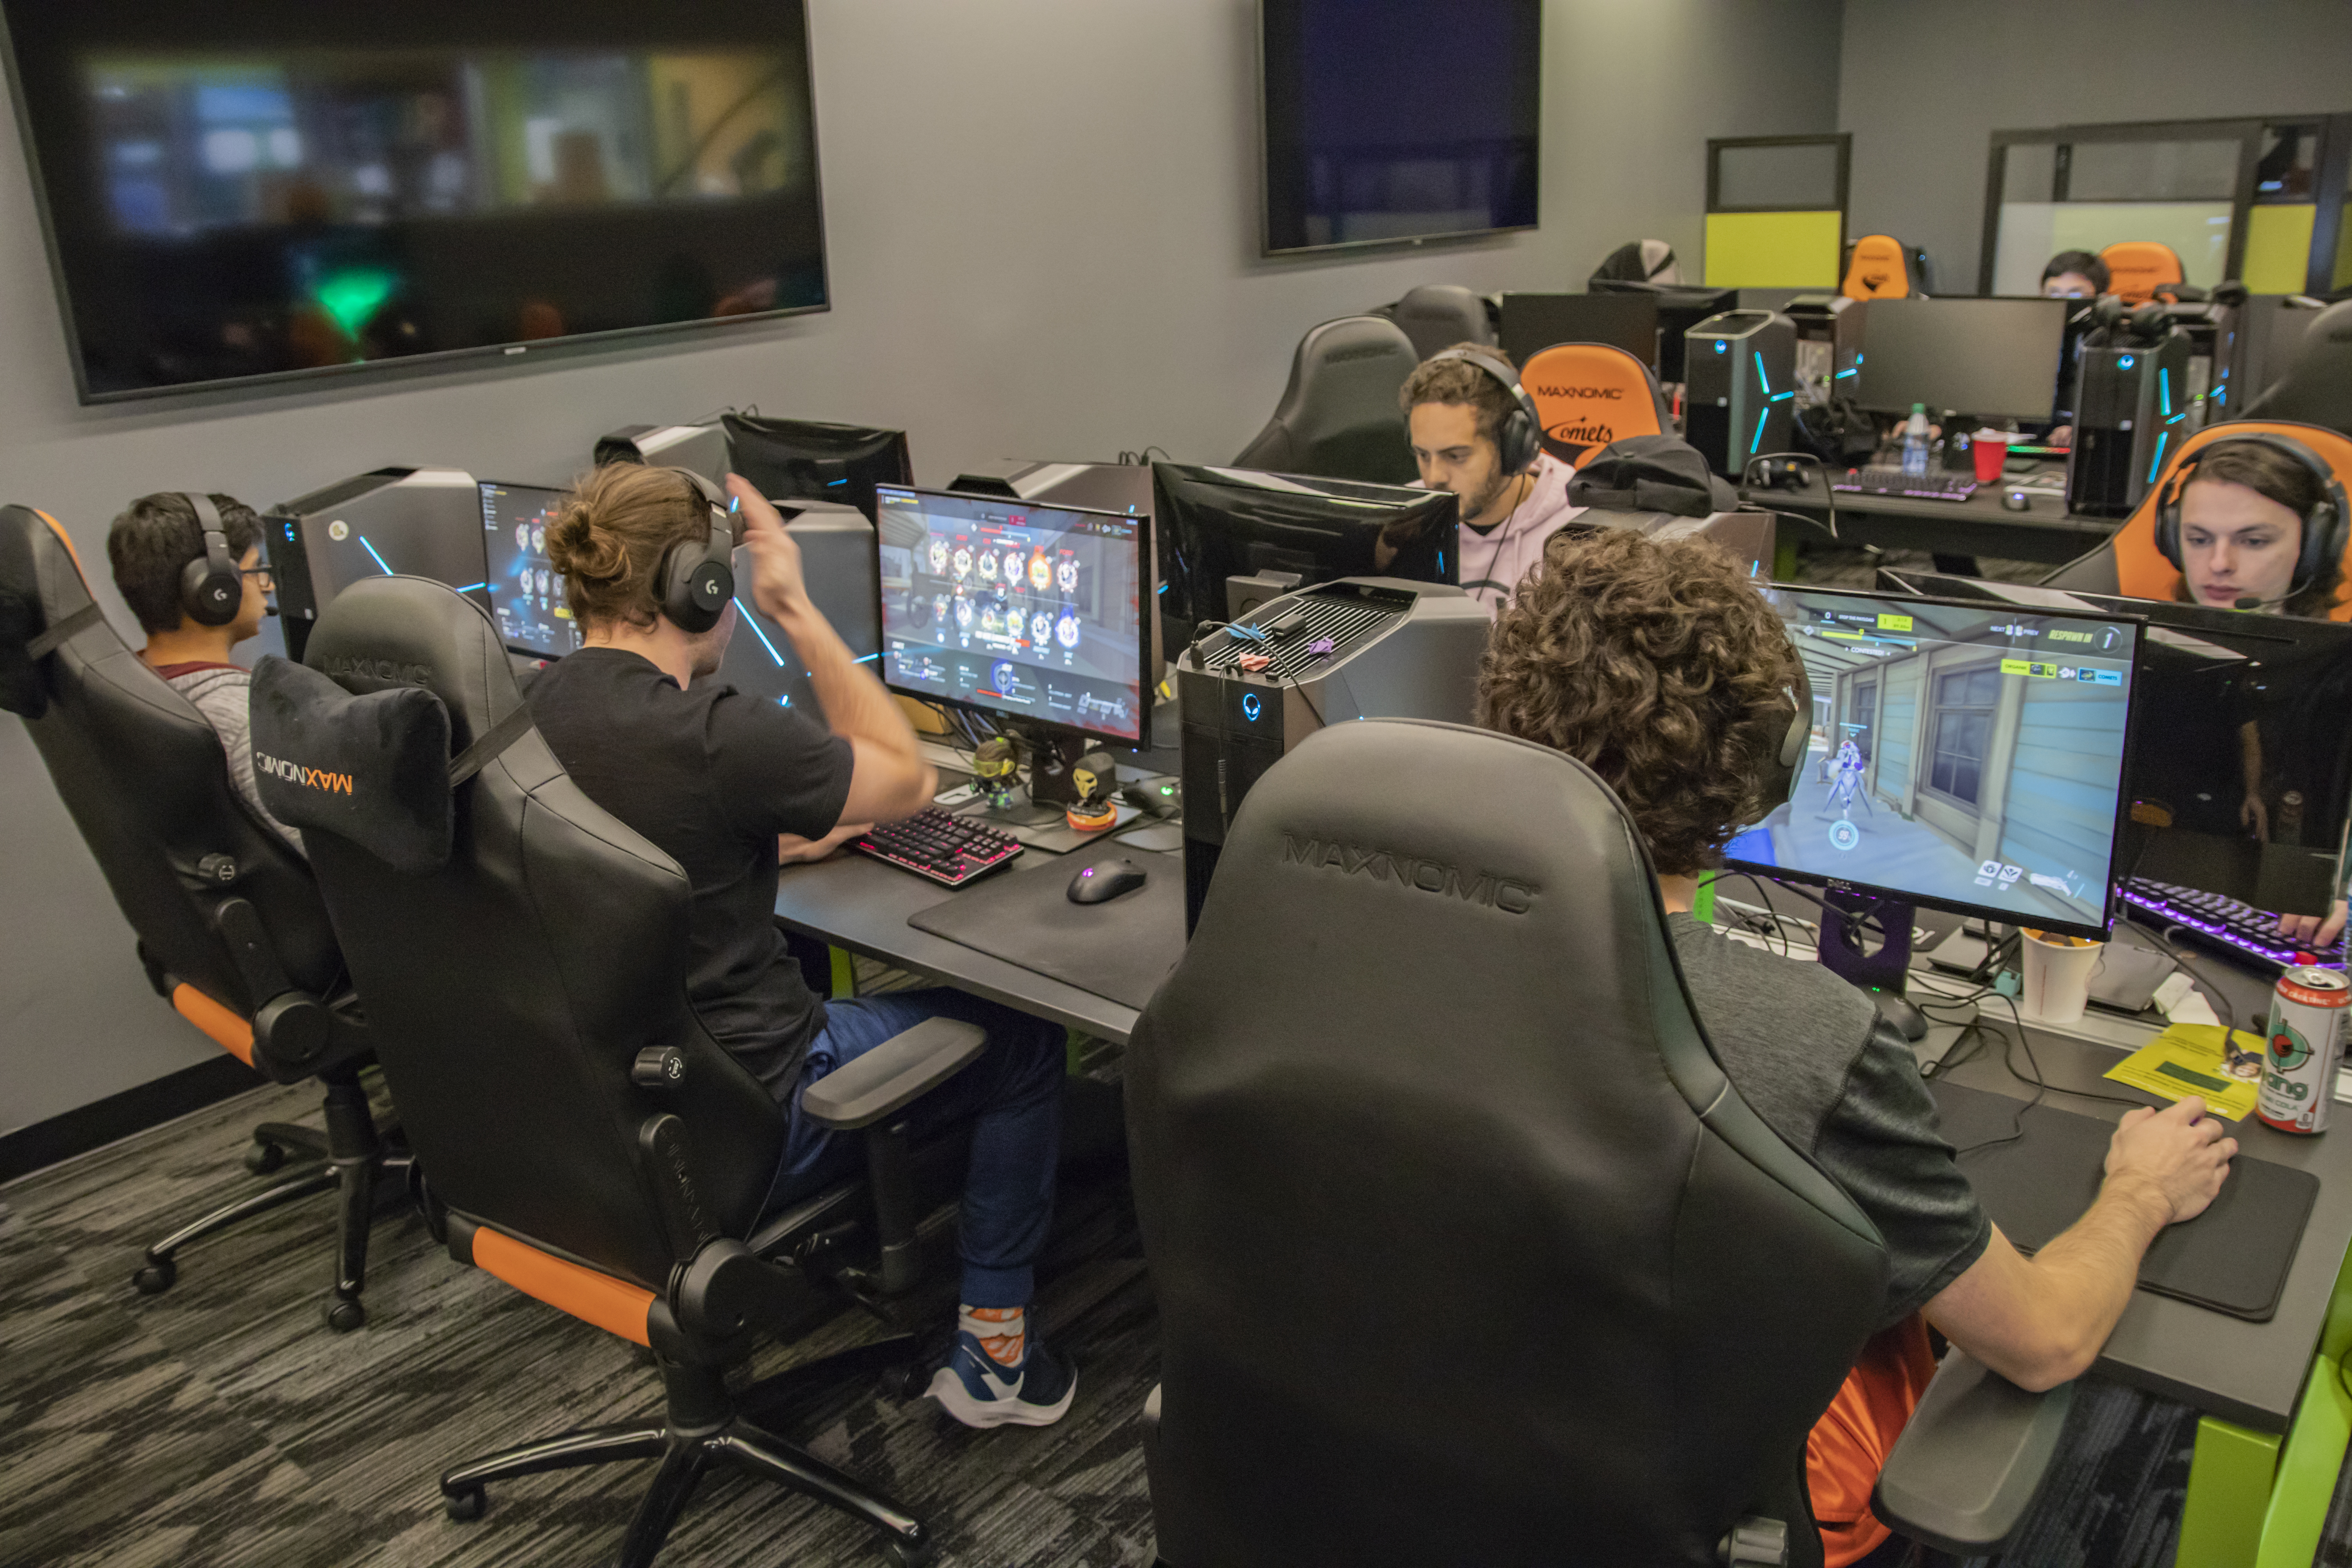 ‘League of Legends’ A team ends season with close loss against Winthrop University